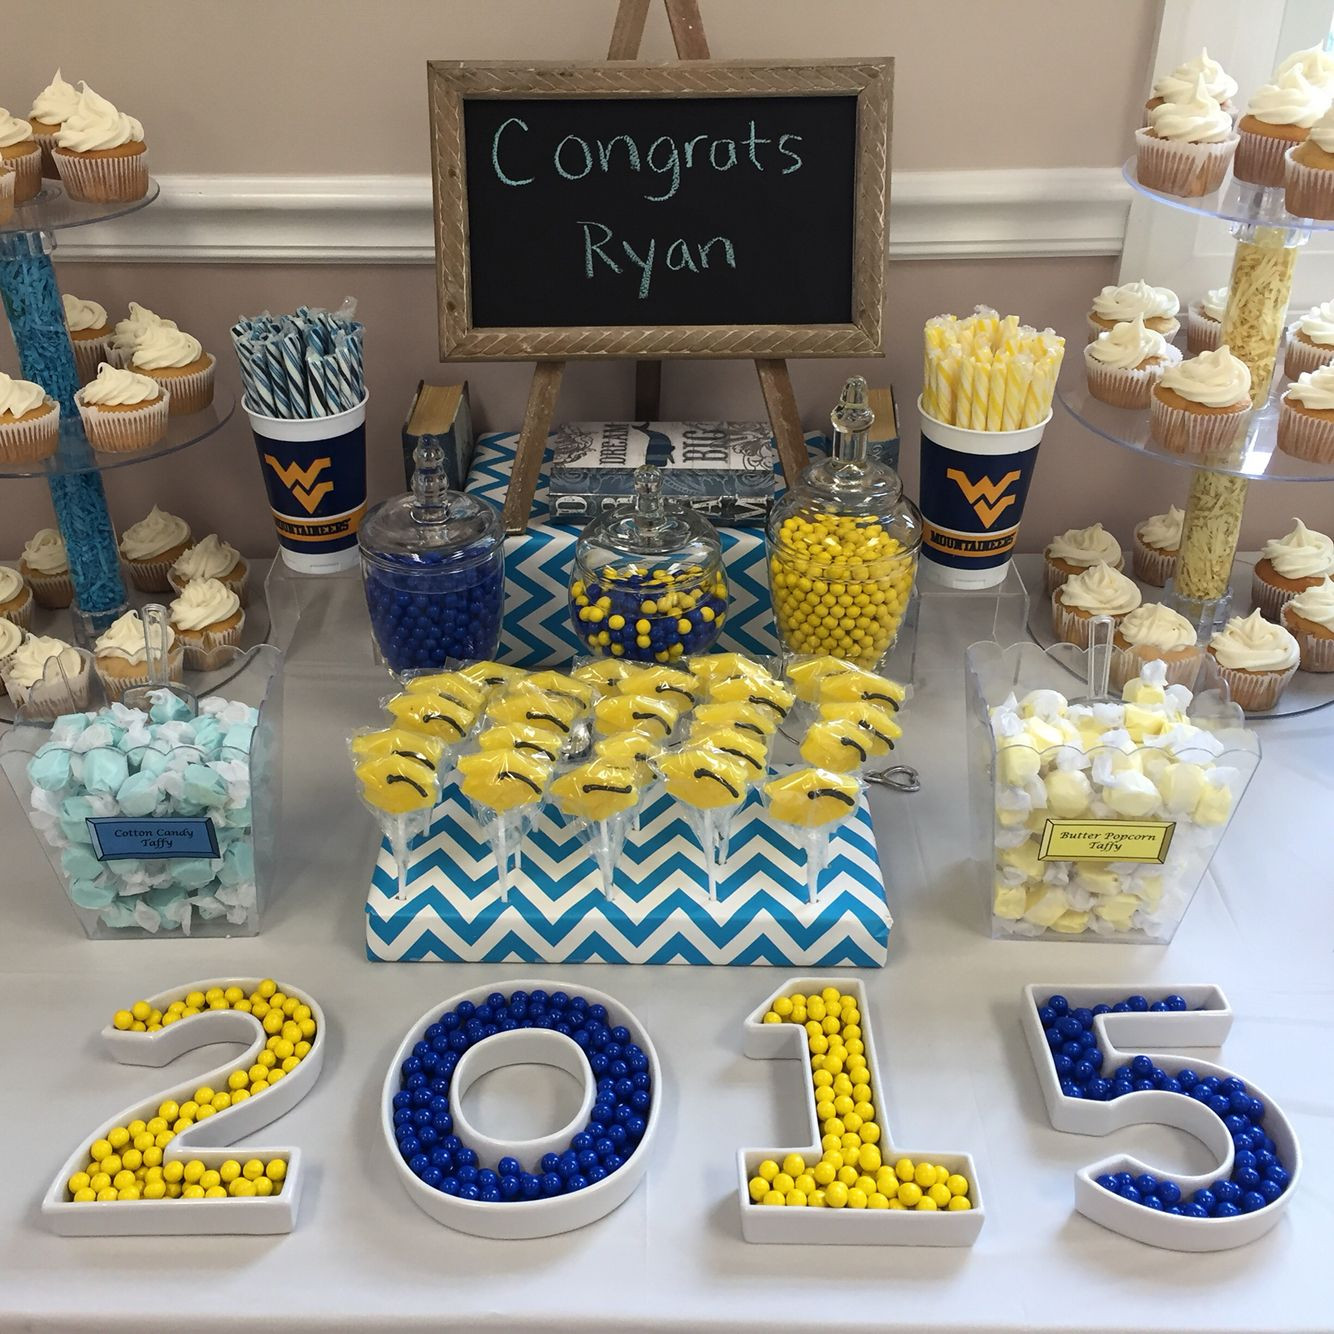 Candy Buffet Ideas For Graduation Party
 Graduation Candy Buffet yellow and blue